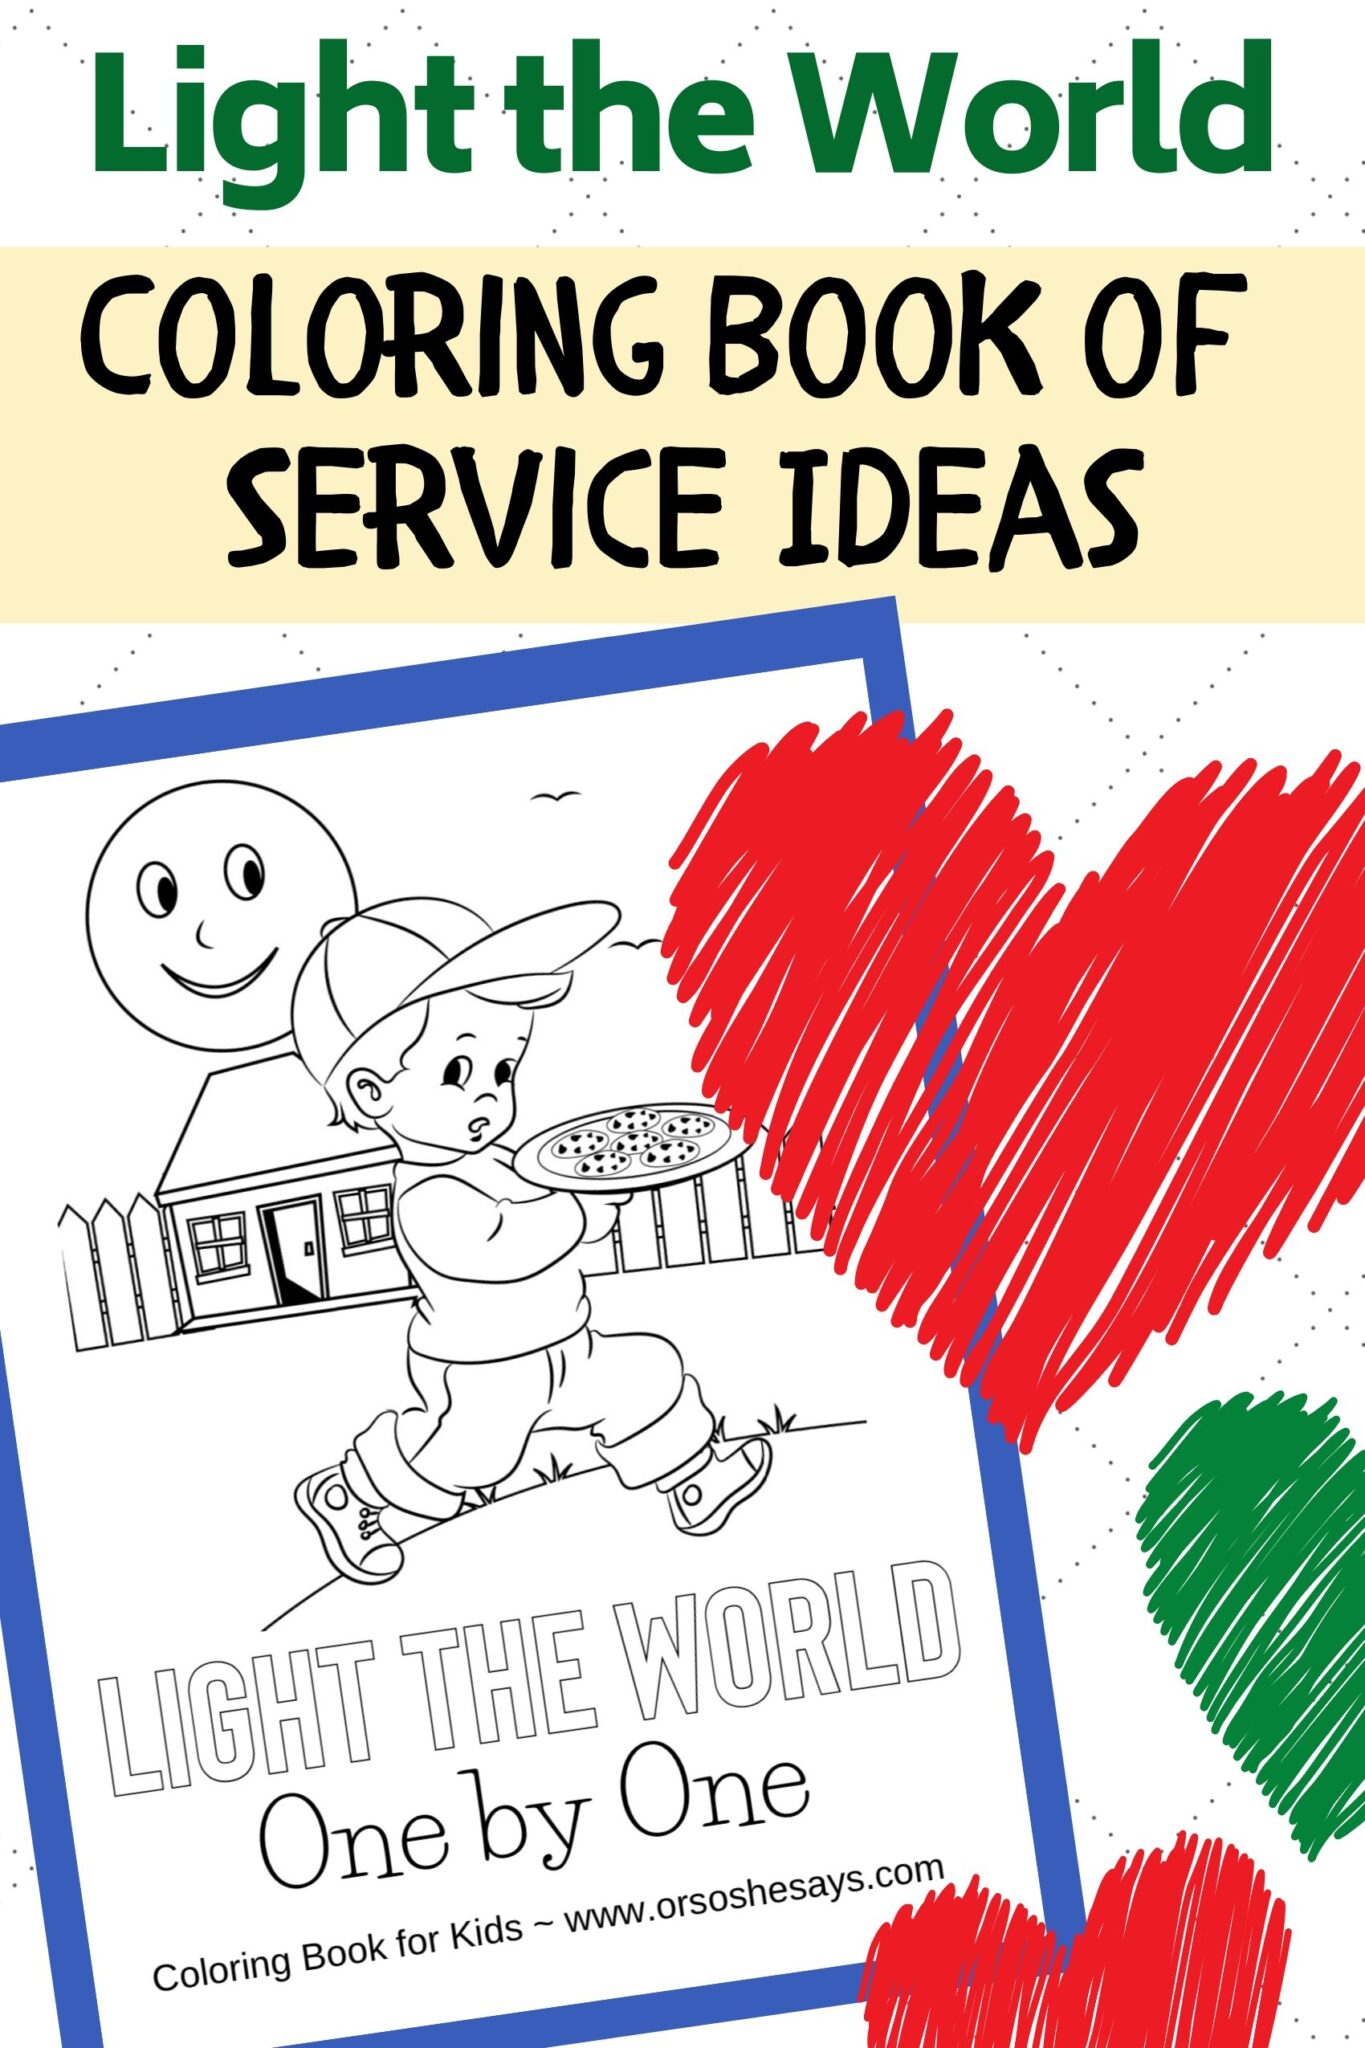 Light the World Activity Service Ideas Coloring Book for Kids Or so